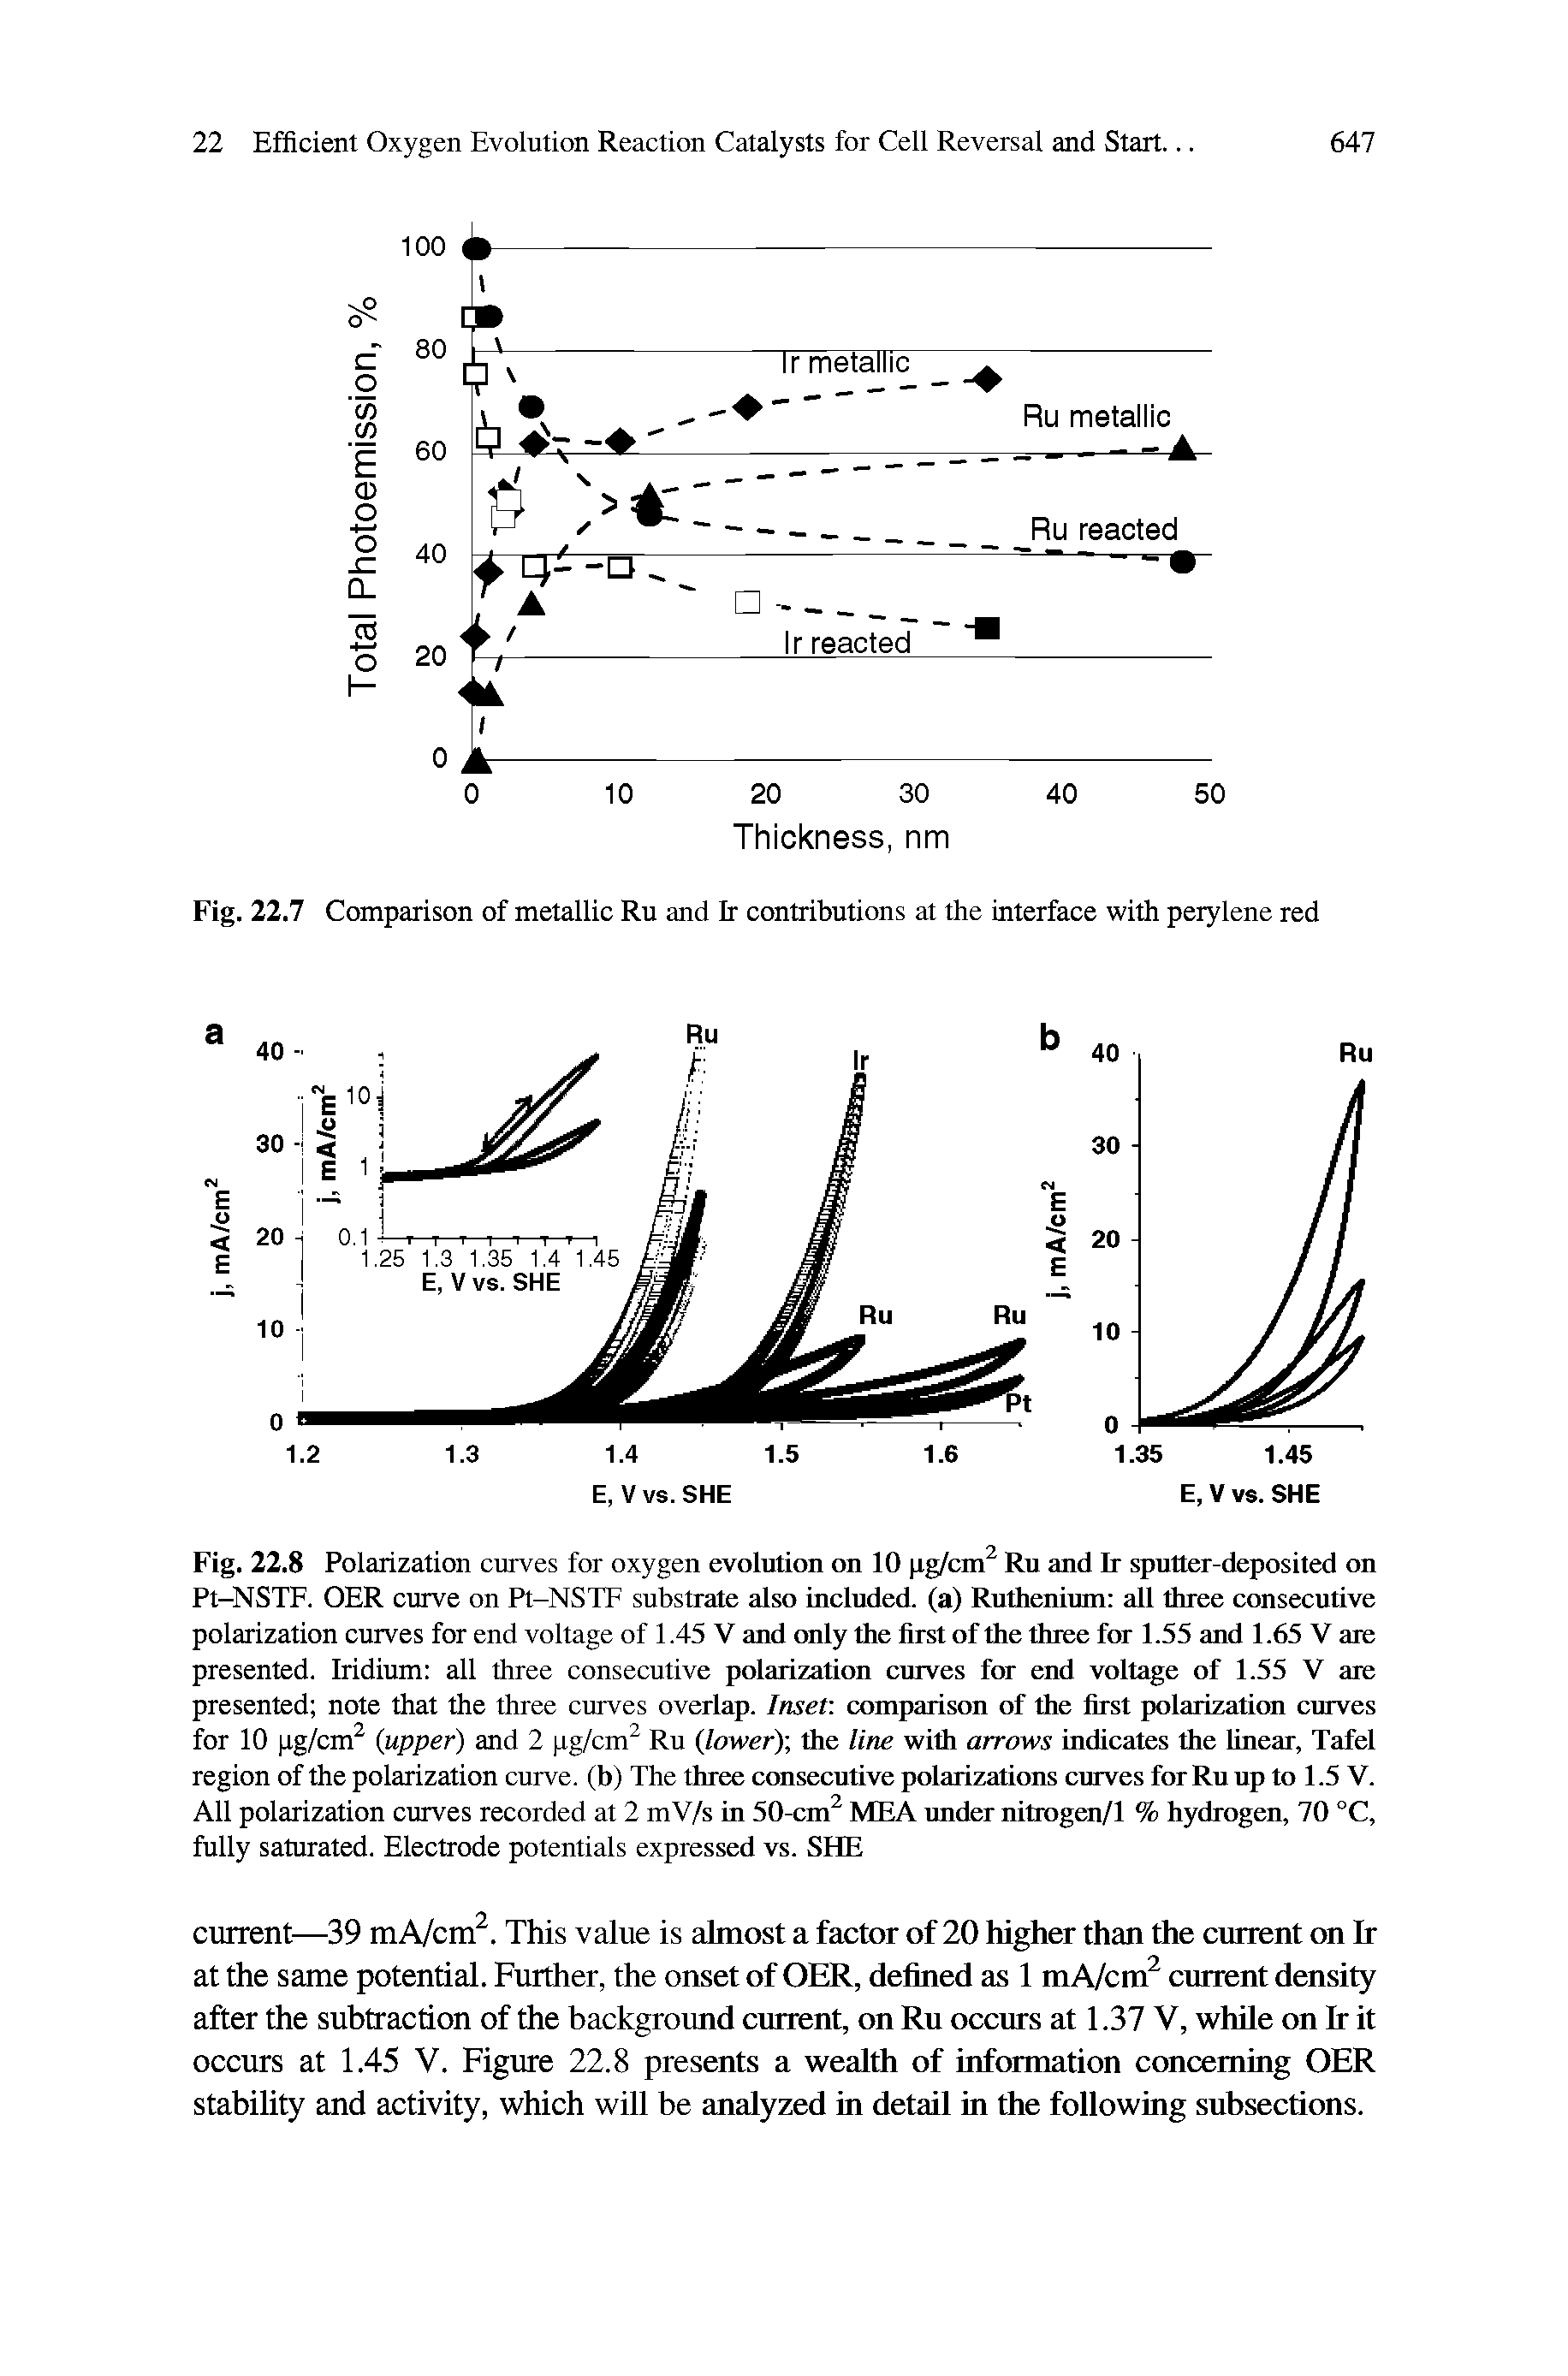 Fig. 22.8 Polarization curves for oxygen evolution on 10 pg/cm Ru and Ir sputter-deposited on Pt-NSTF. OER curve on Pt-NSTF substrate also included, (a) Ruthenium all three consecutive polarization curves for end voltage of 1.45 V and only the first of the three for 1.55 and 1.65 V are presented. Iridium all three consecutive polarization curves Iot end voltage of 1.55 V are presented note that the three curves overlap. Inset comparison of the first polarizatirai curves for 10 pg/cm upper) and 2 pg/cm Ru lower), the line with arrows indicates the linear, Tafel region of the polarization curve, (b) The three crmsecutive polarizations curves for Ru up to 1.5 V. All polarization curves recorded at 2 mV/s in 50-cm MEA under nitrogen/1 % hydrogen, 70 °C, fully saturated. Electrode potentials expressed vs. SHE...